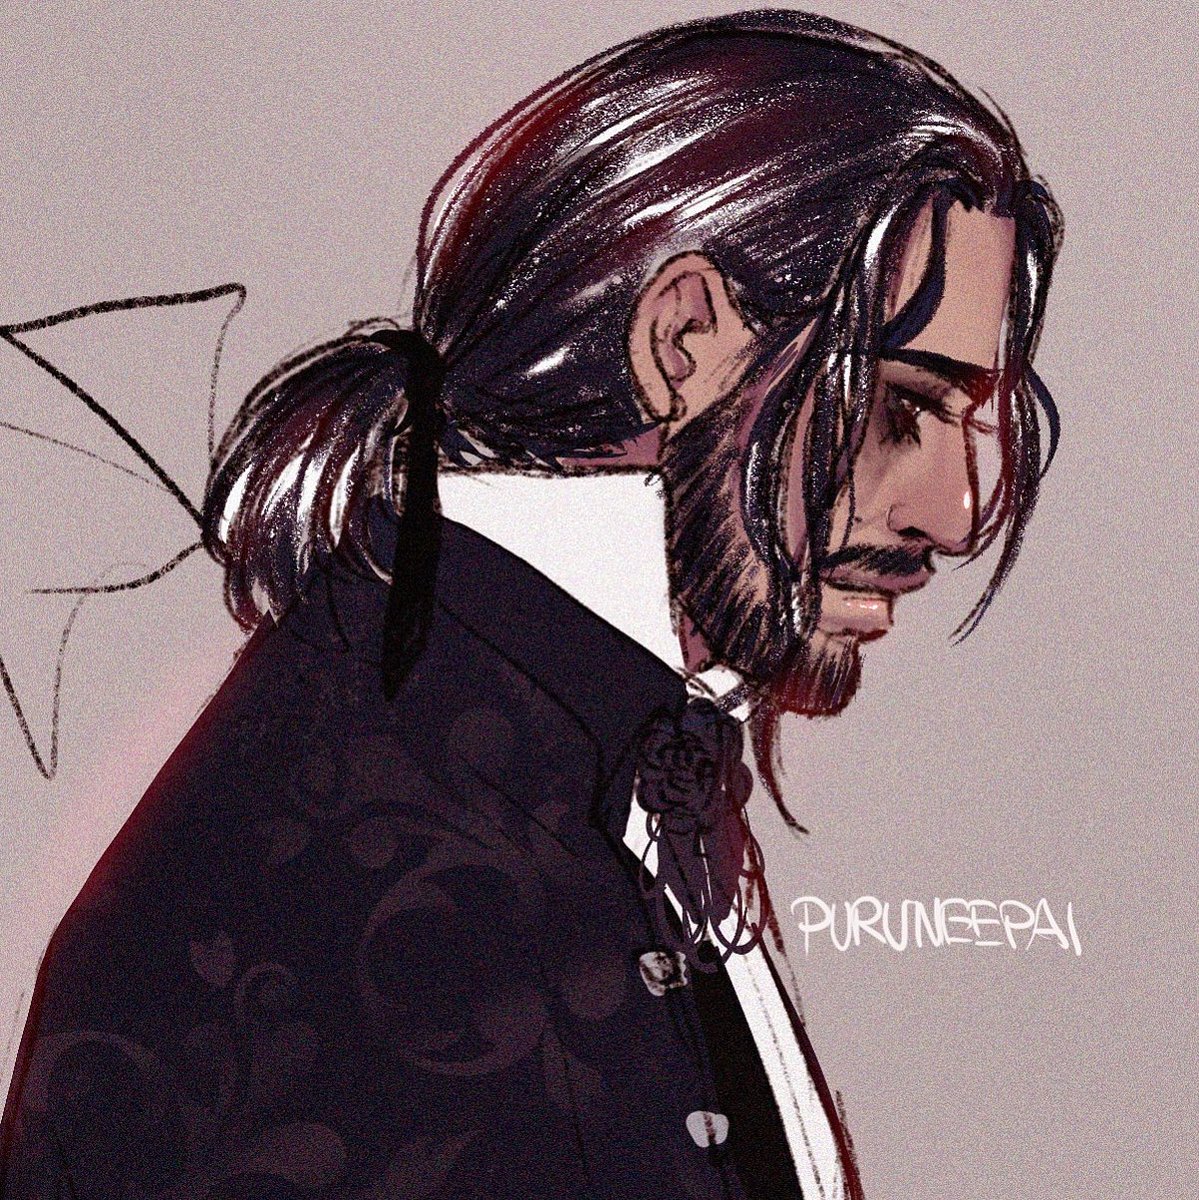 Puru On Twitter Rewatched Mozart L Opera Rock Today And I M Hyped Again Listening To The Songs And Doodled Salieri Florent Mothe After Nearly Three Years Again Ahhh Love Him So Much